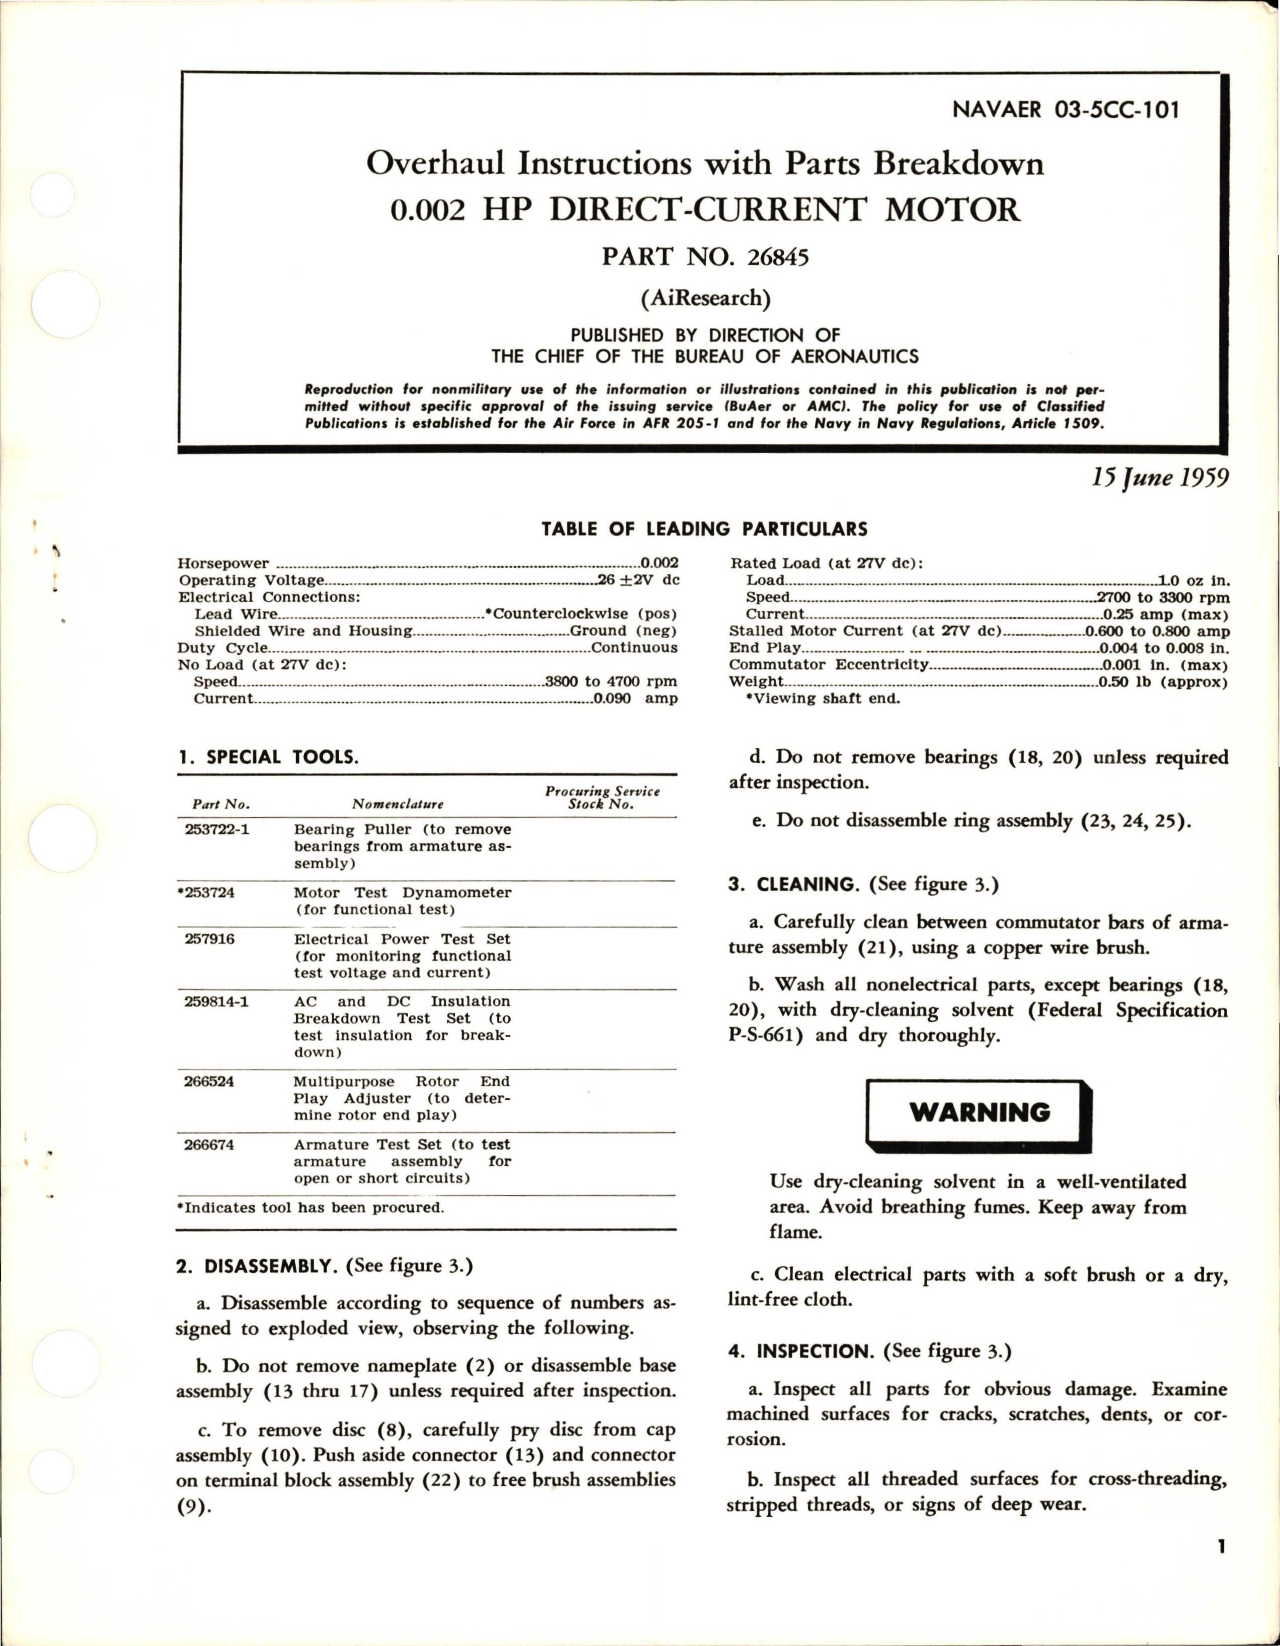 Sample page 1 from AirCorps Library document: Overhaul Instructions with Parts Breakdown for Direct Current Motor - 0.002 HP - Part 26845